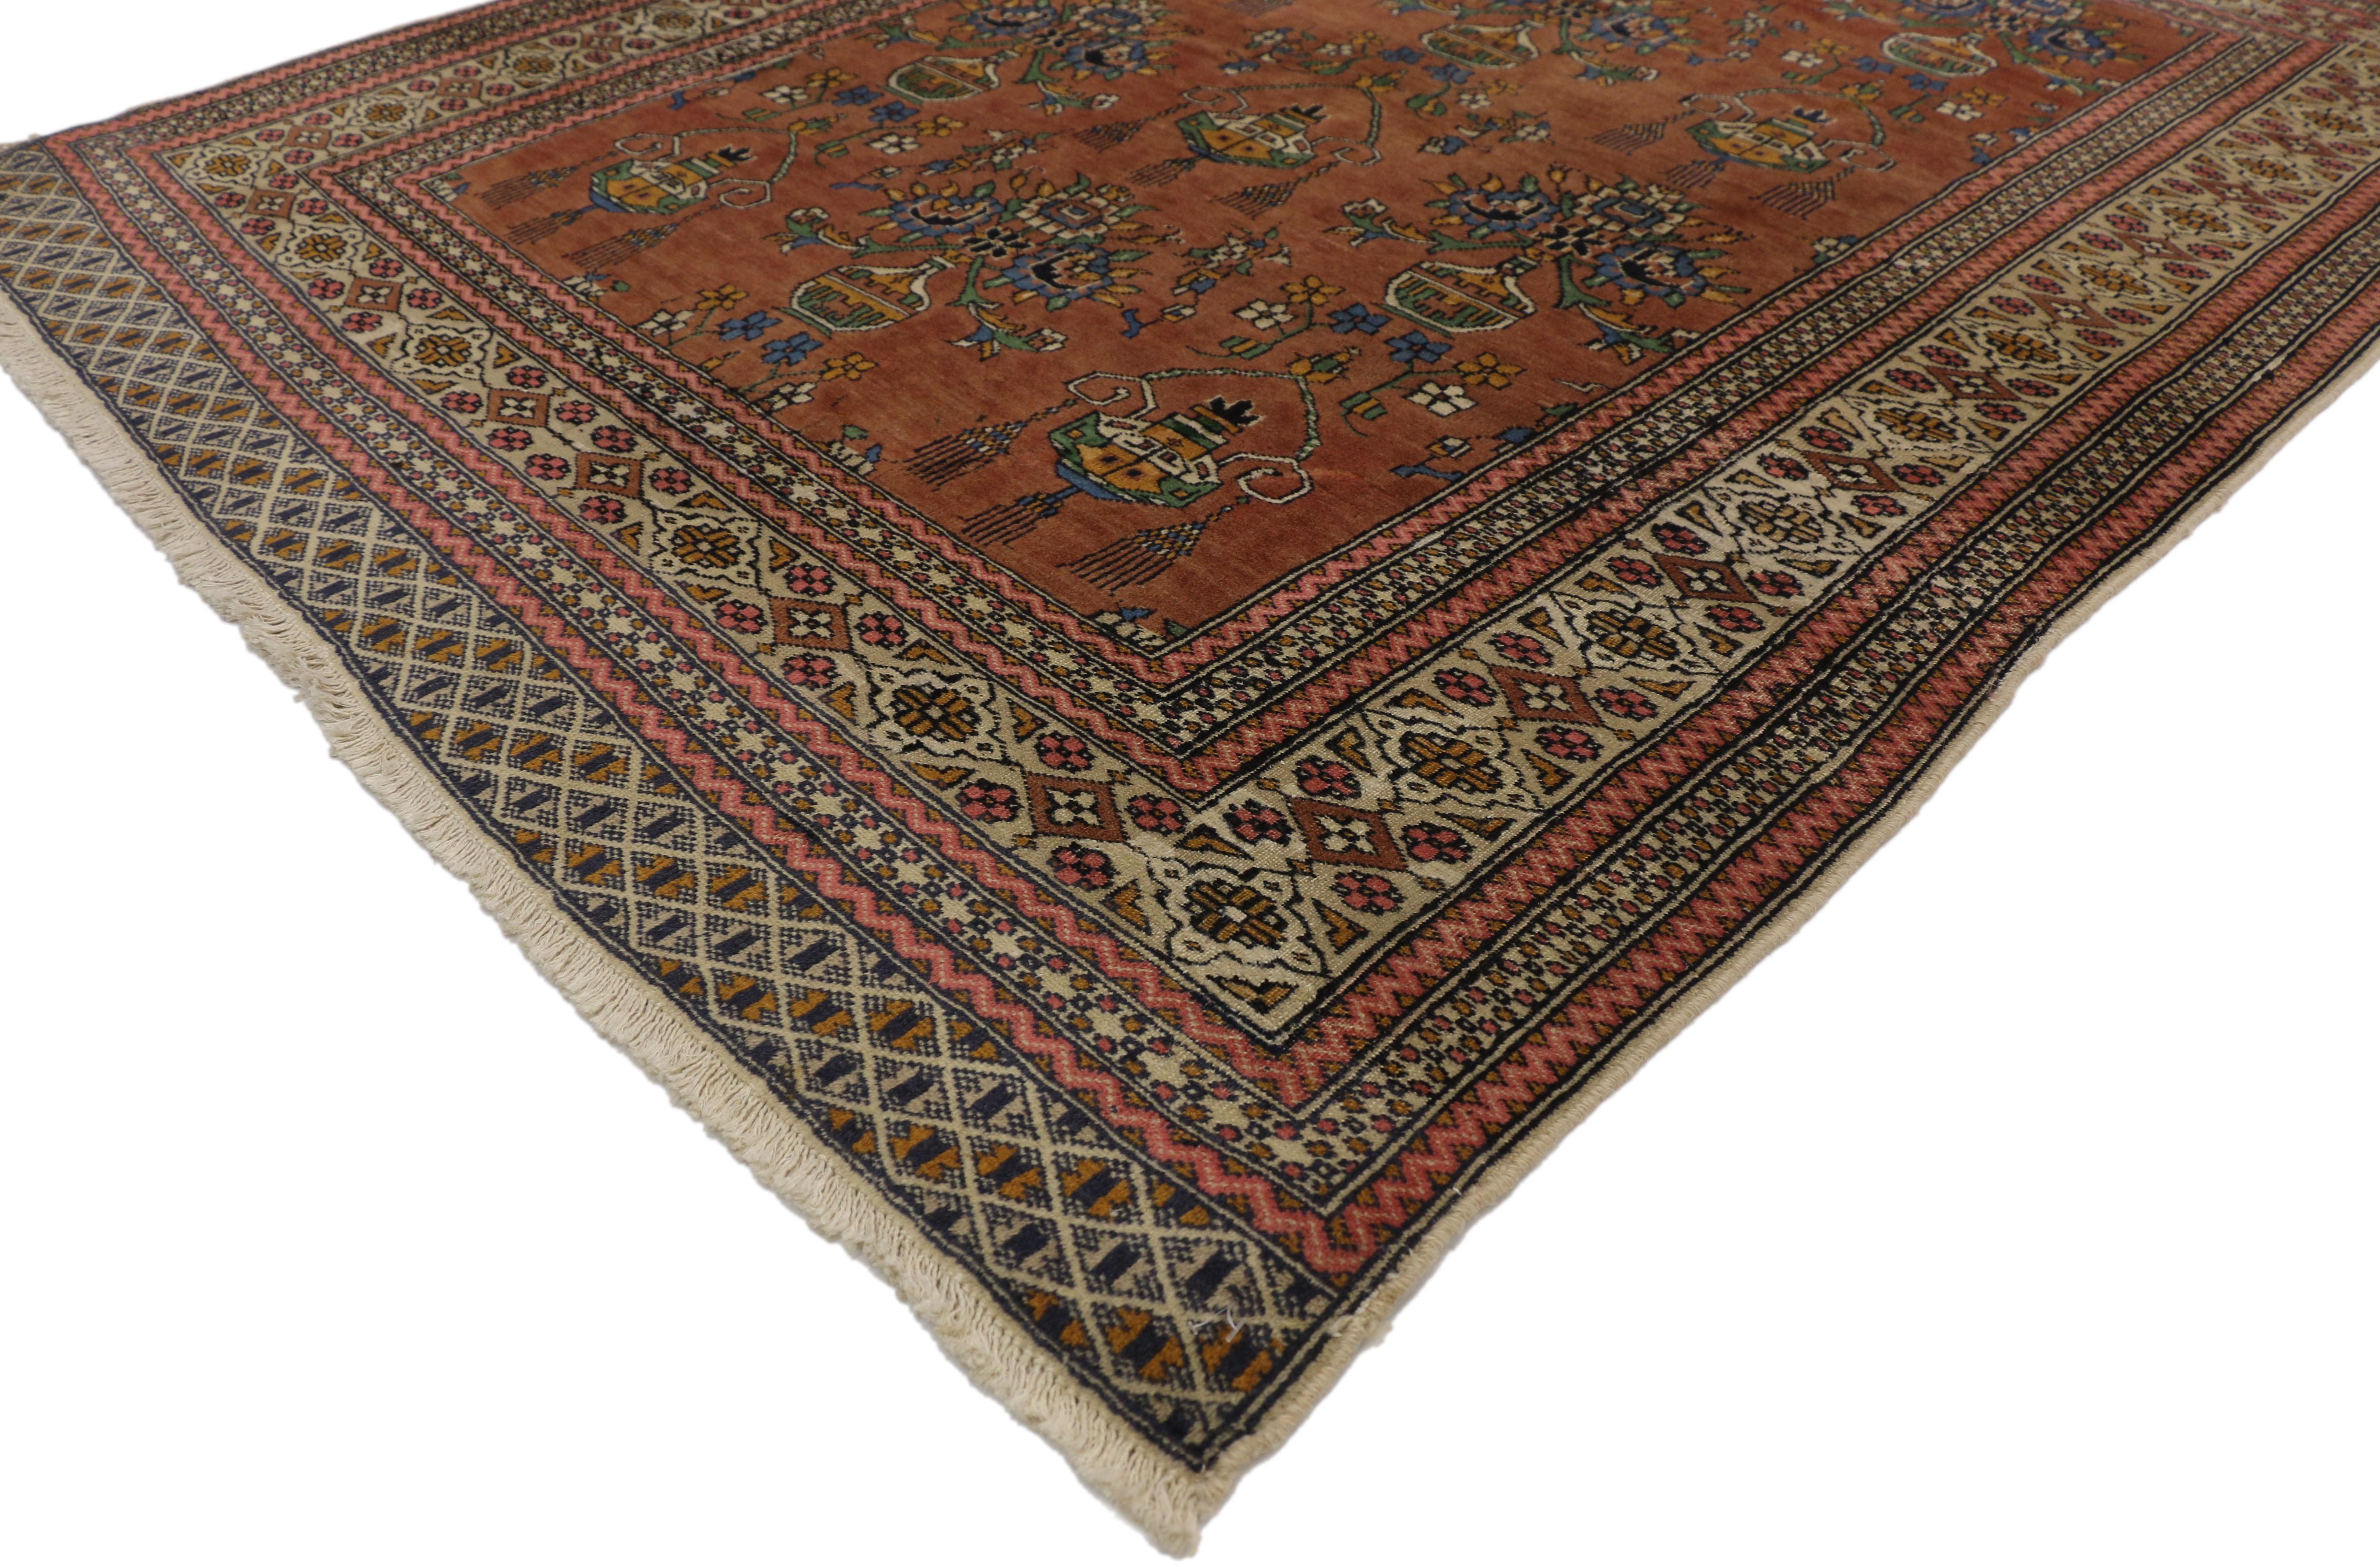 75959 vintage Turkmen Persian rug with Floral Vase design and Arts & Crafts style. This hand knotted wool vintage Turkmen Persian rug features a vase design overflowing with blooming lotus palmettes, stylized florals, and leafy tendrils on an